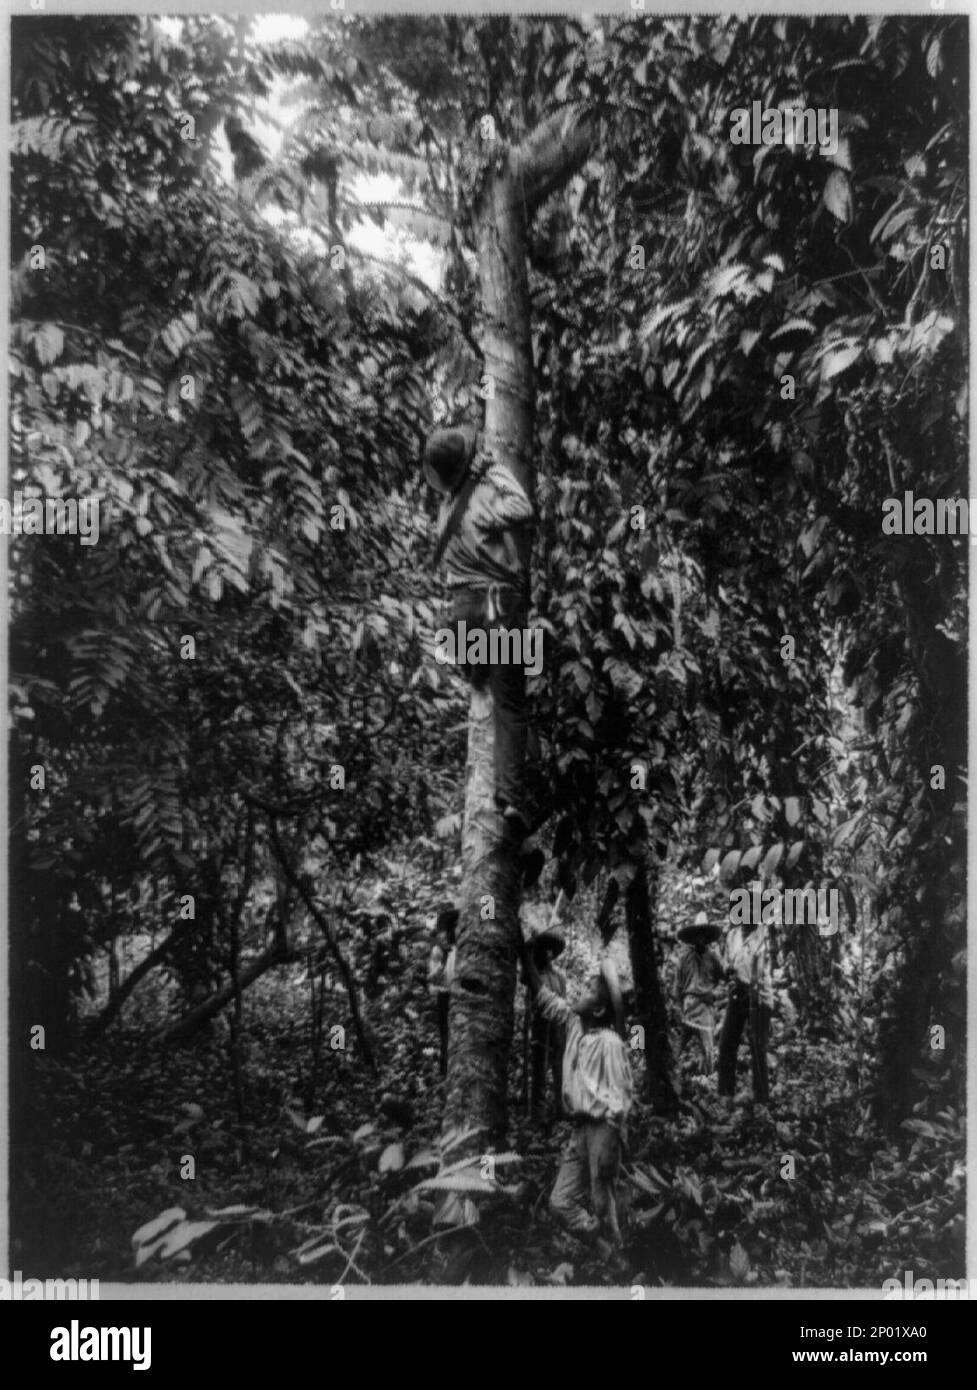 Tapping a rubber tree, Motagua Valley, Guatemala. Frank and Frances Carpenter Collection, Rubber trees,Guatemala,1890-1930, Tapping,Guatemala,1890-1930. Stock Photo